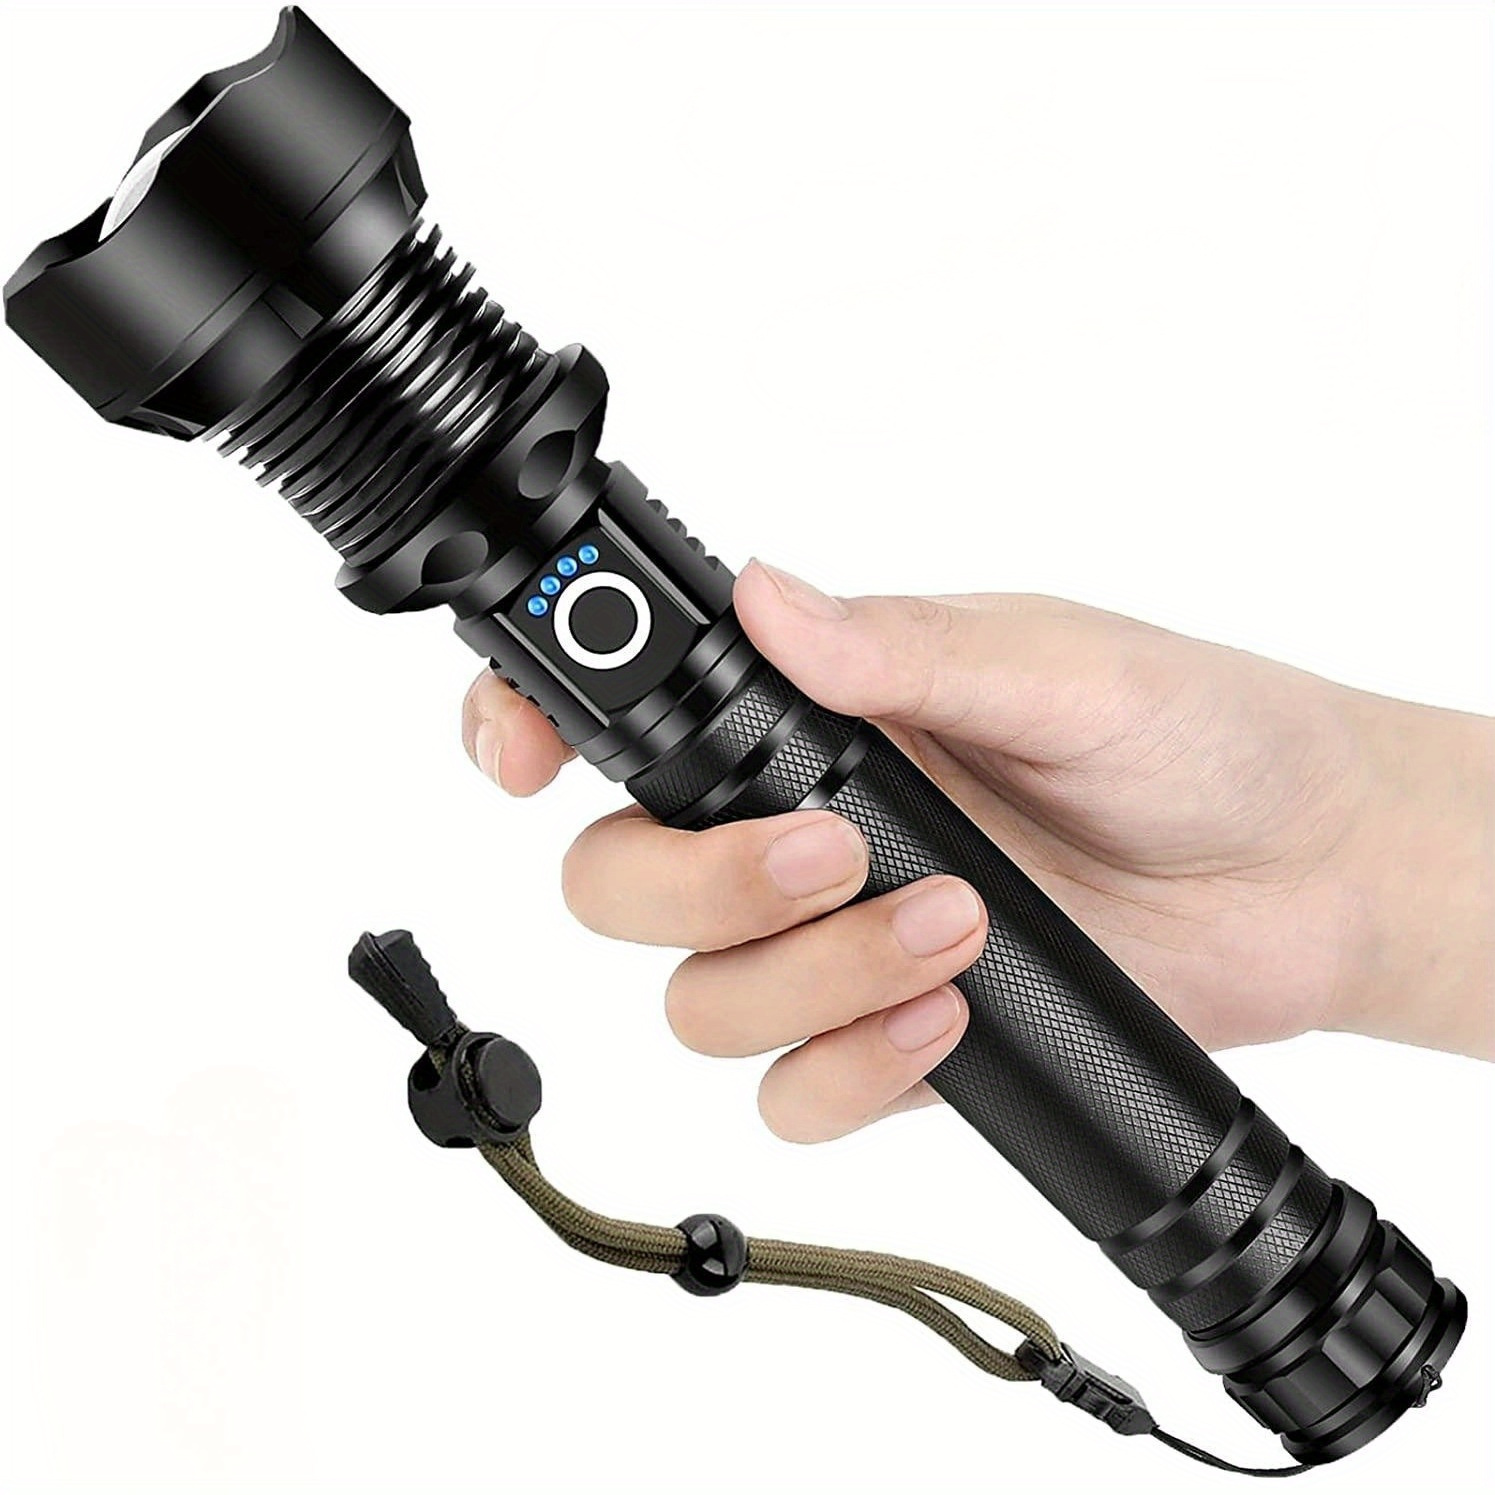 

1pc Flashlight With Zoomable Lens, Rechargeable Led Headlight For Emergencies, Patrol, Outdoor, Camping, Fishing, And Hunting, Powered By 18650 Or 26650 Battery